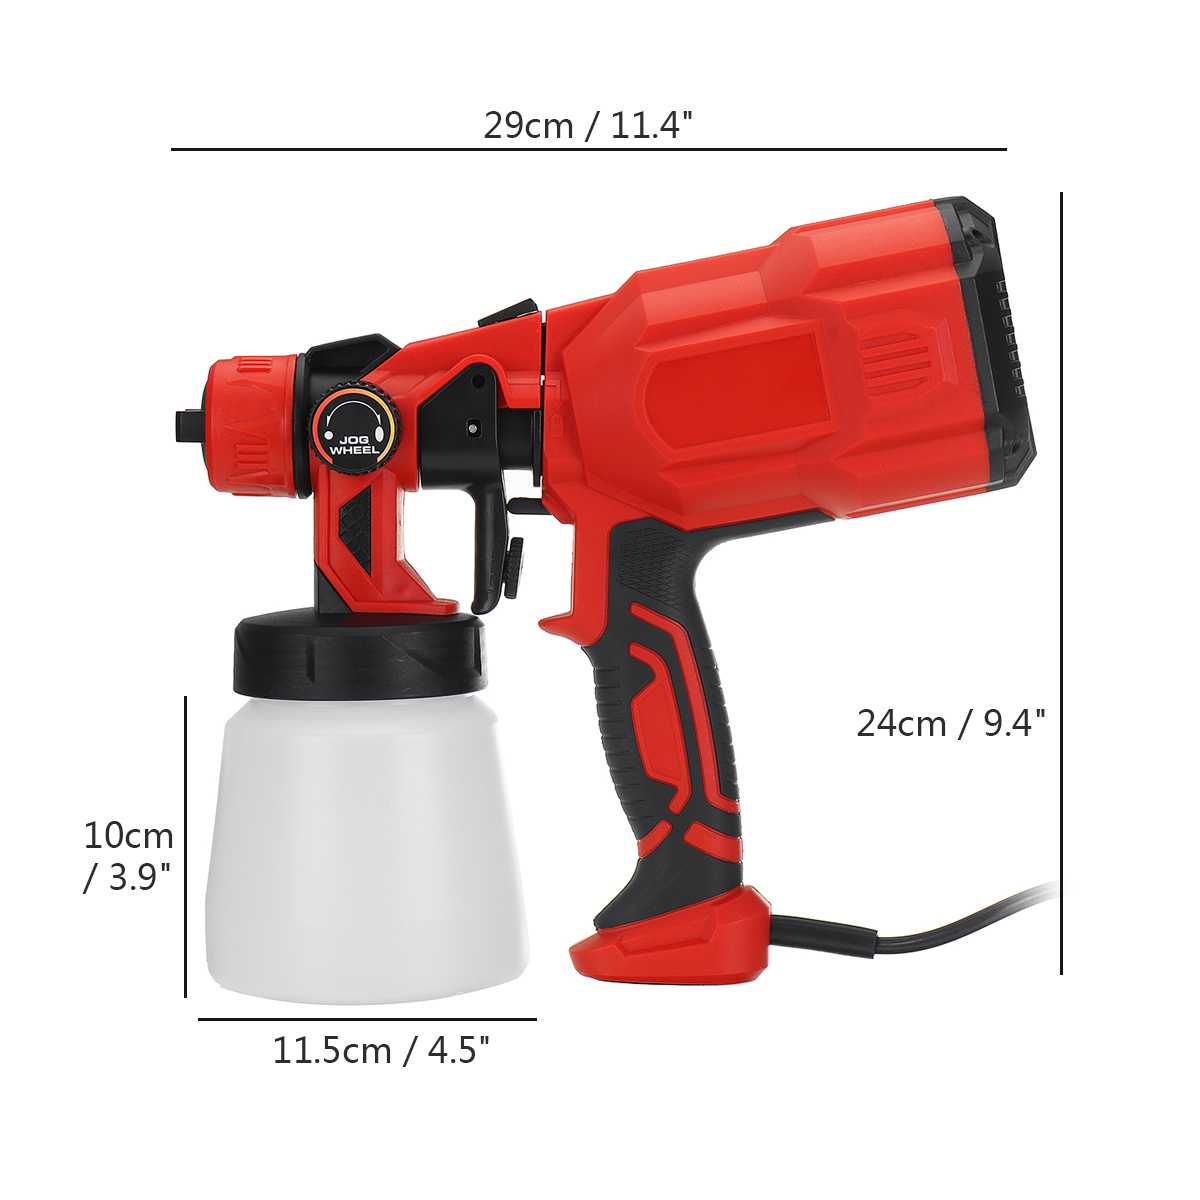 Removable-Electric-Paint-Spray-Guns-High-Pressure-Gravity-Feed-Kit-Speed-Regulator-Paint-Tools-Prime-1873508-8